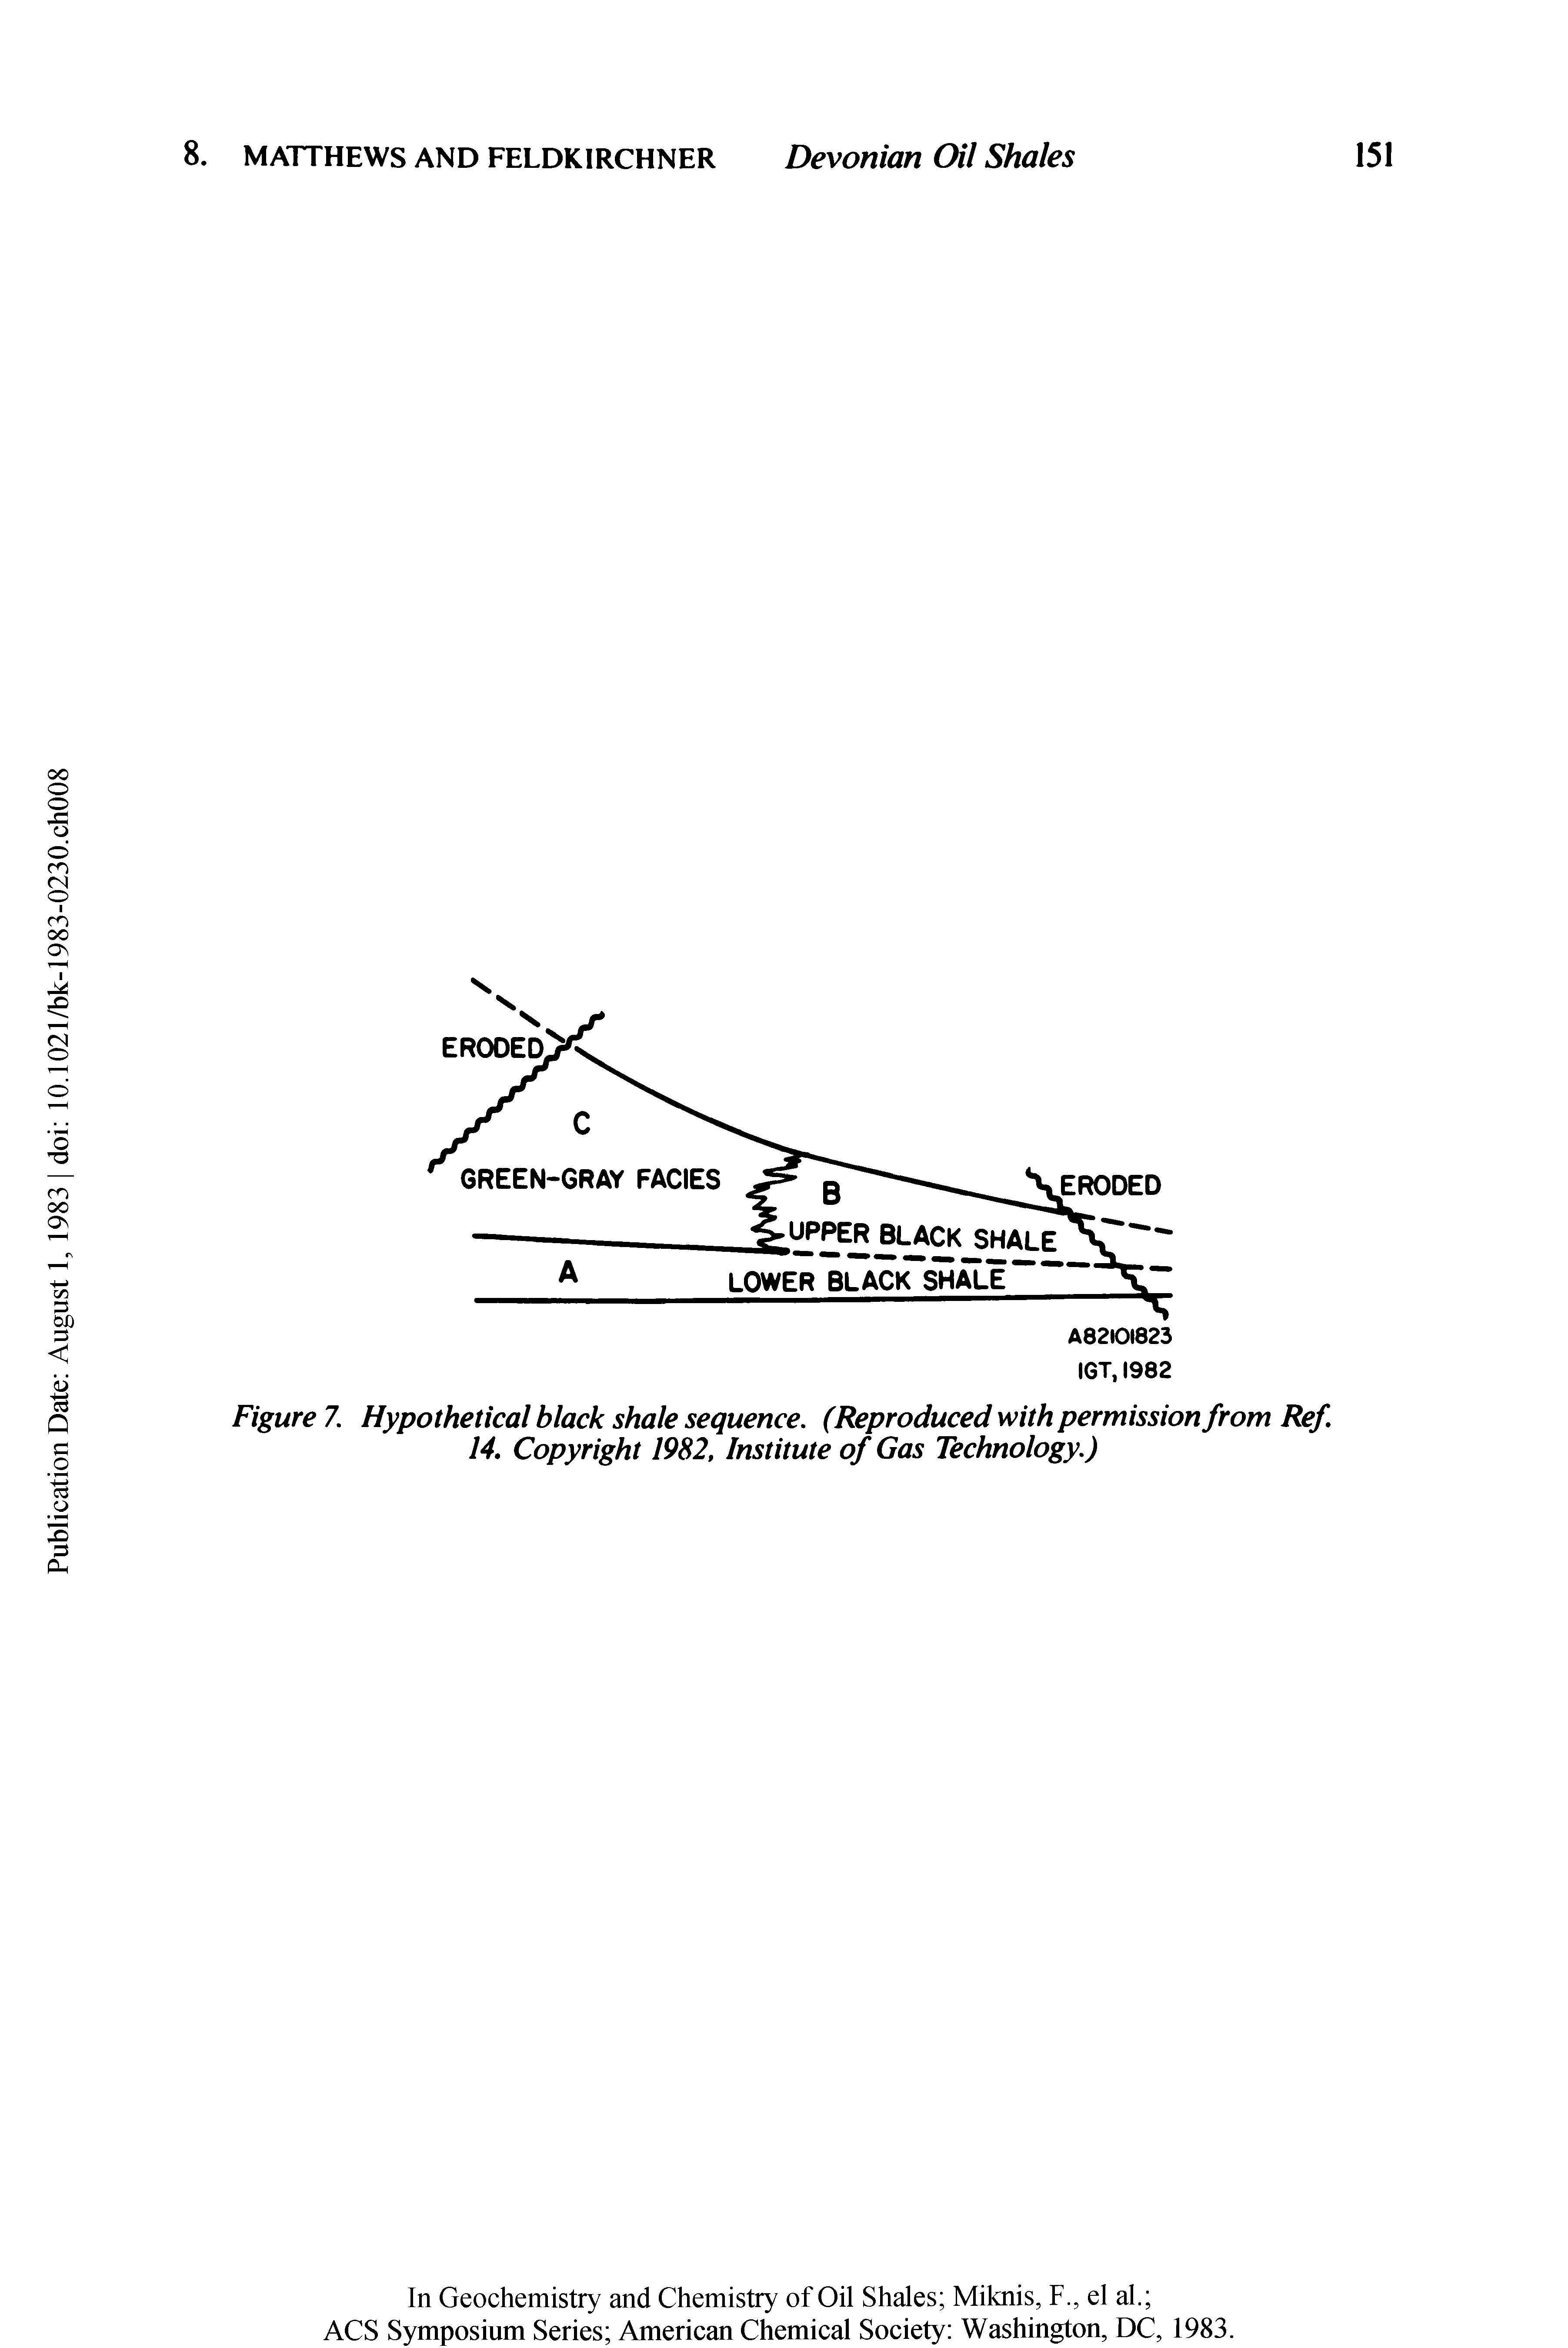 Figure 7. Hypothetical black shale sequence. (Reproduced with permission from Ref 14. Copyright 1982, Institute of Gas Technology.)...